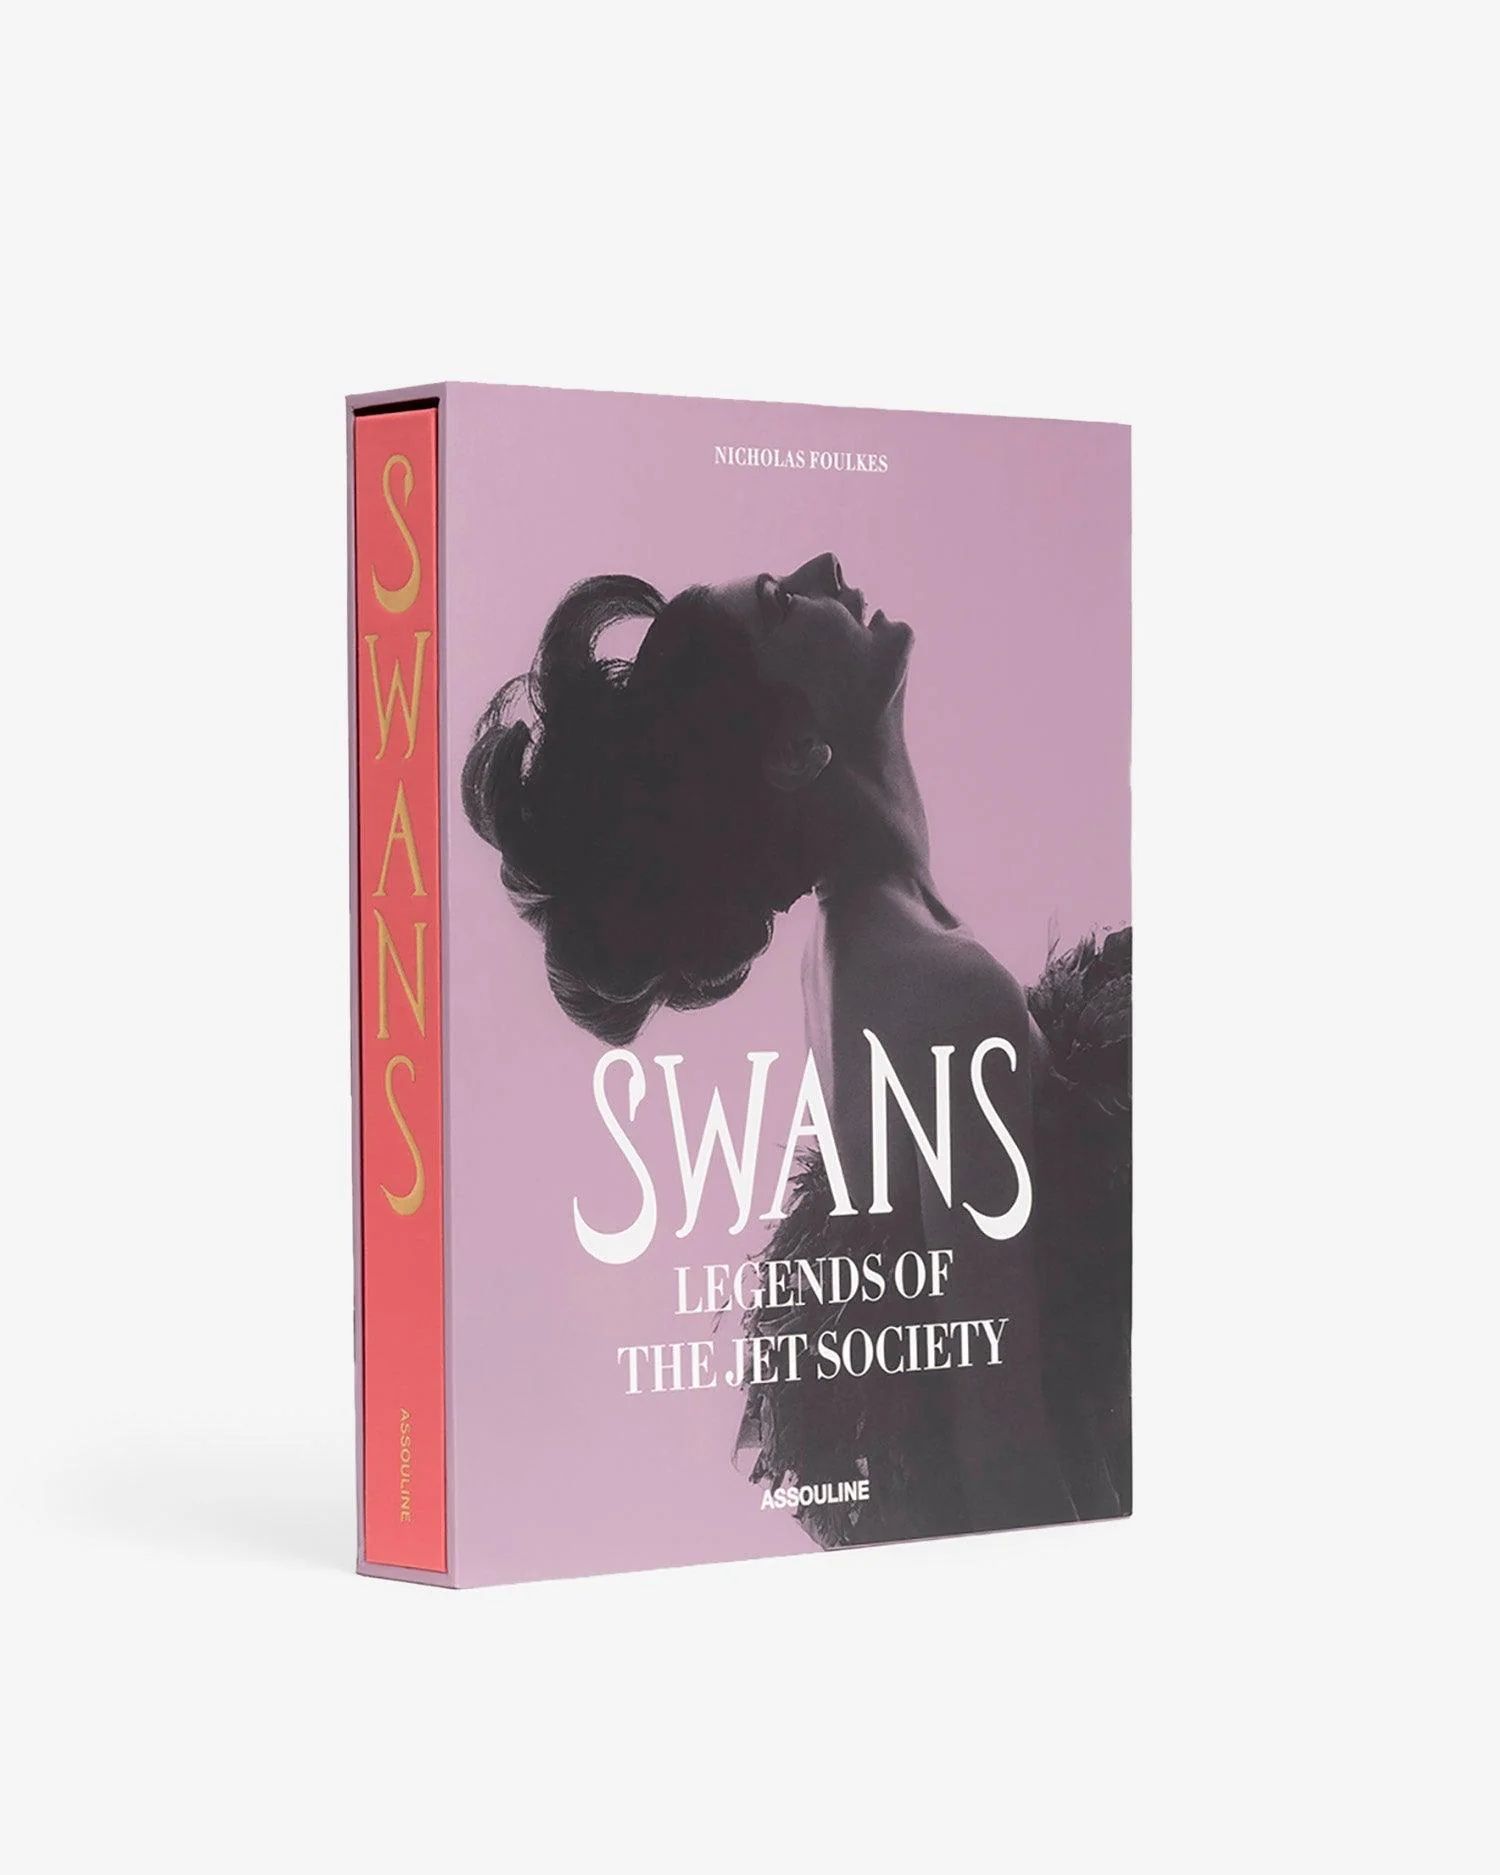 SWANS: Legends of the Jet Society by Nicholas Foulkes - Coffee Table Book | ASSOULINE | Assouline